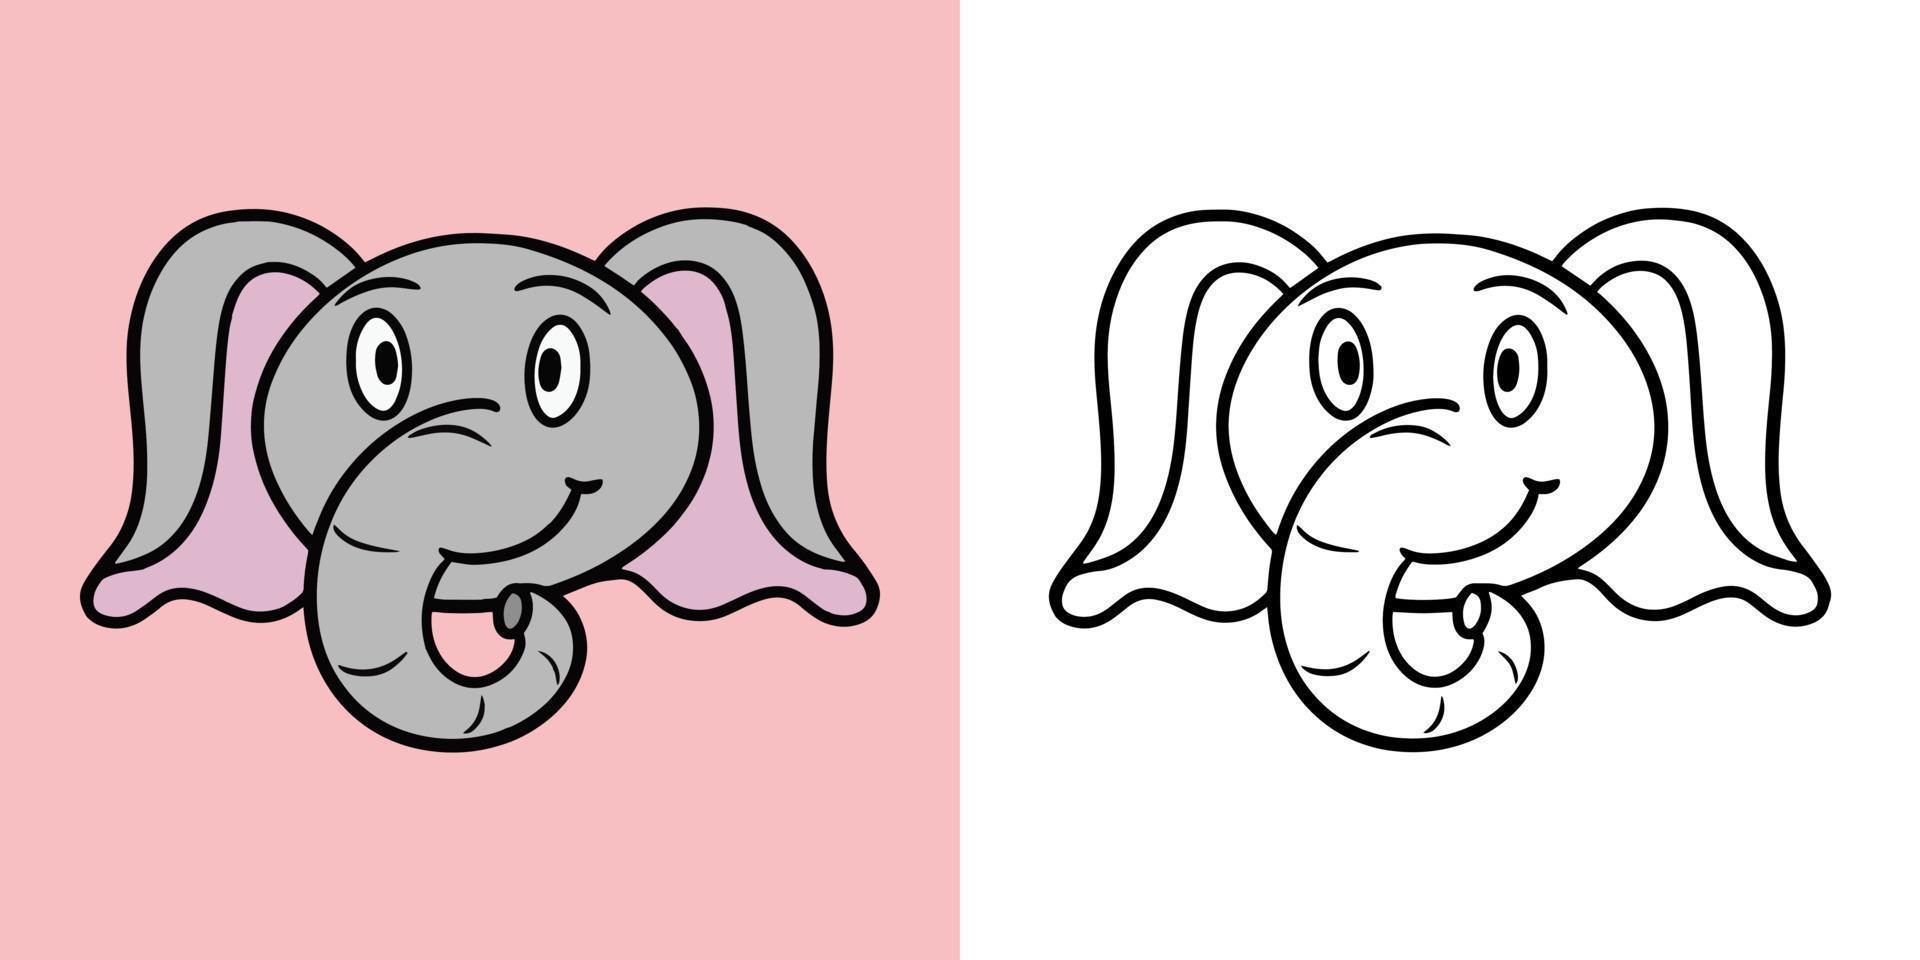 Horizontal set of illustrations for coloring books, Cute little elephants smiling, vector illustration in cartoon style